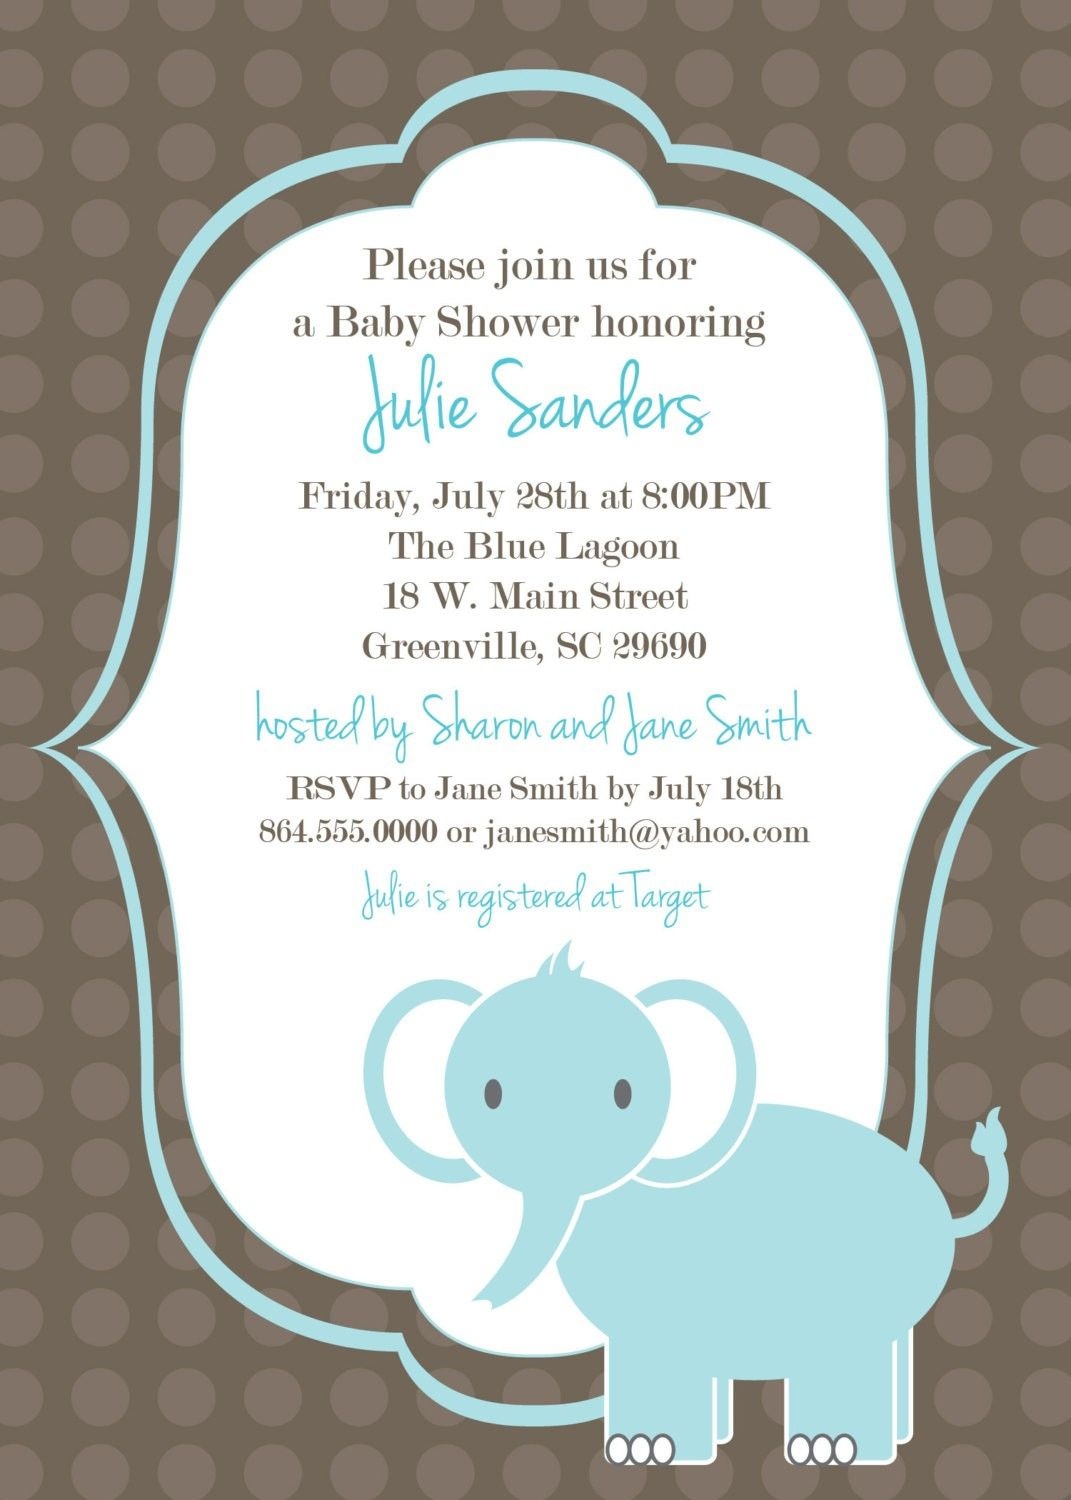 Download Free Template Got The Free Baby Shower Invitations - Create Your Own Baby Shower Invitations Free Printable